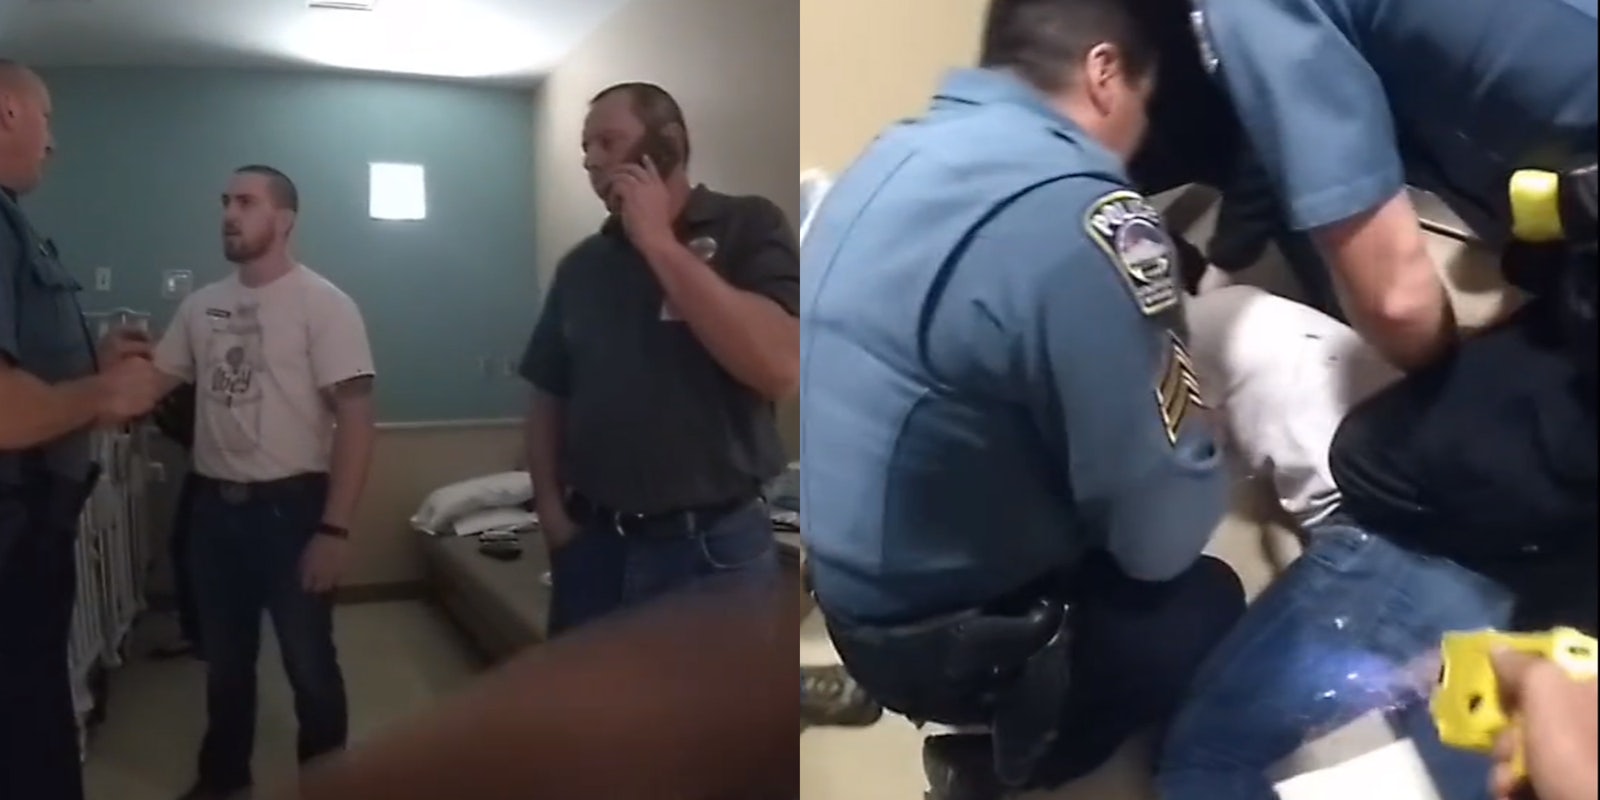 police confront man in hospital room (l) police restrain and taze man on floor (r)